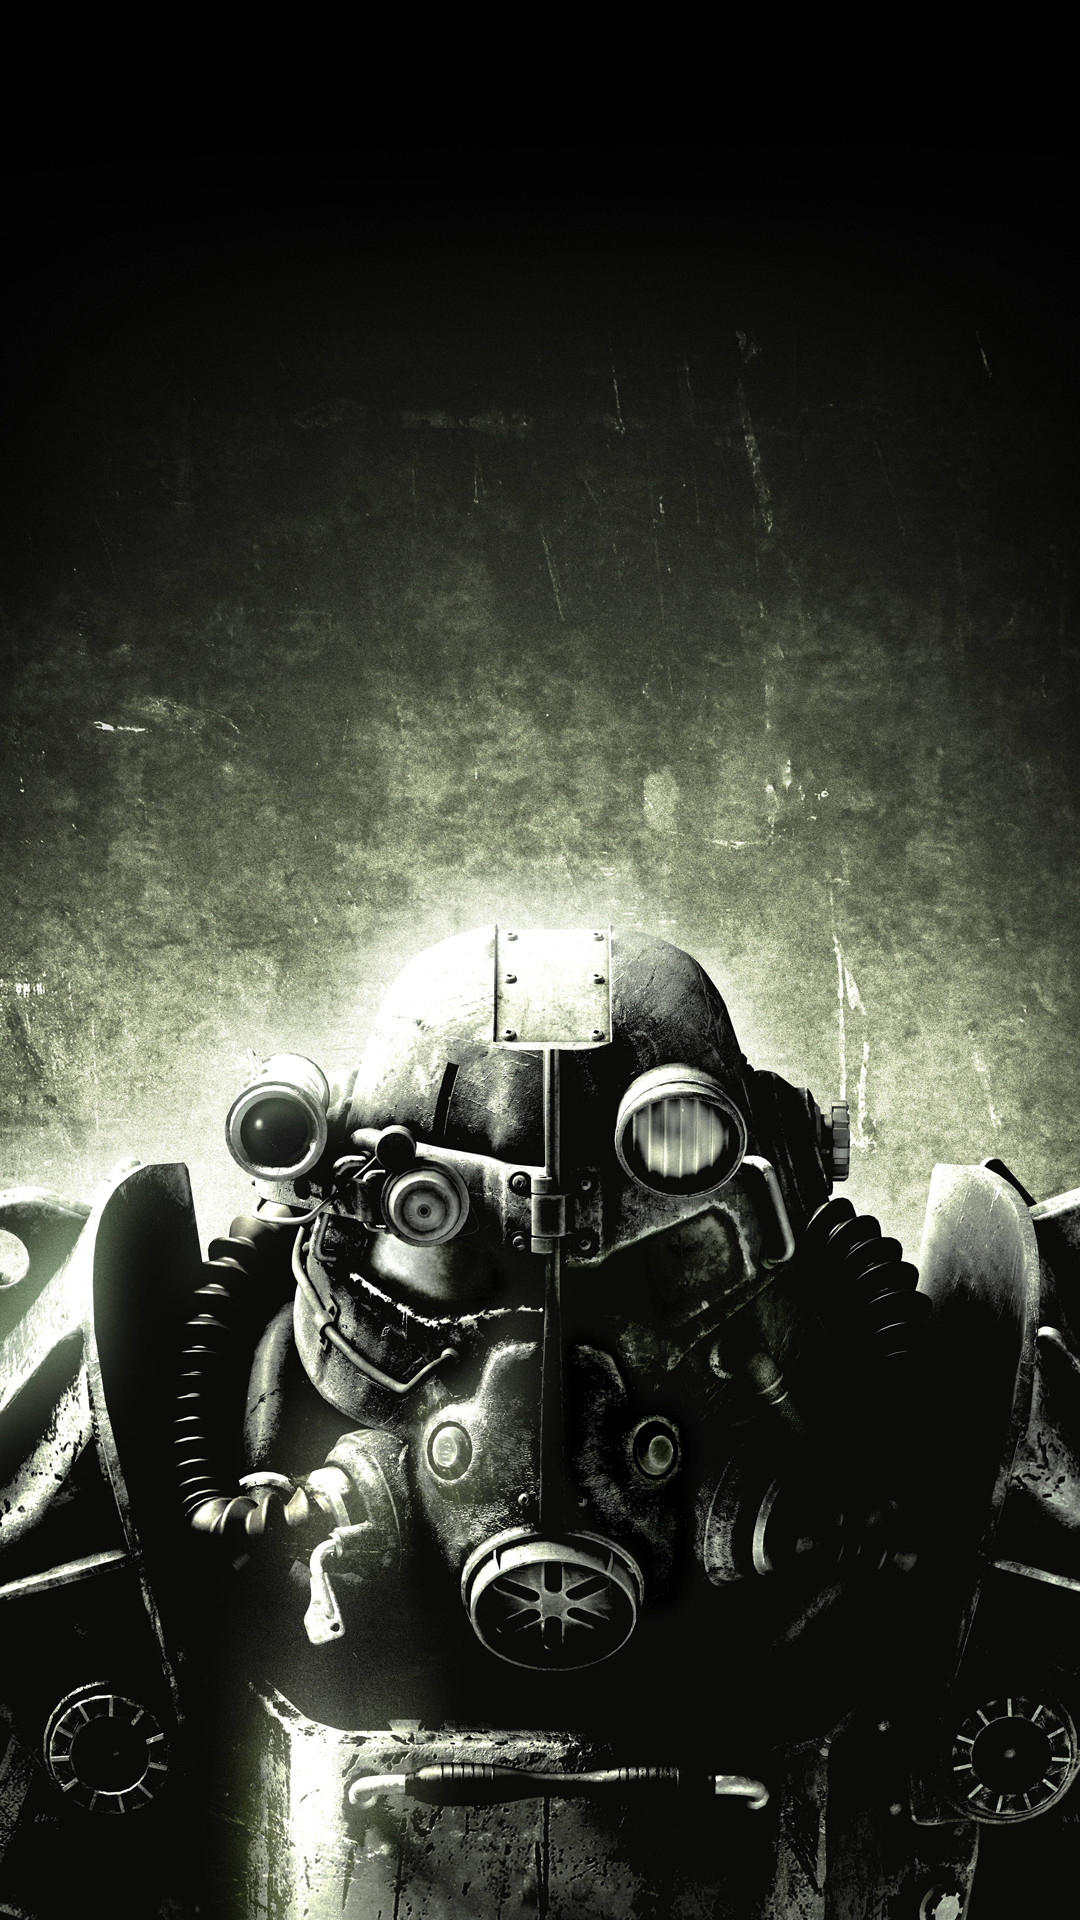 Fallout 4 htc one wallpaper – Best htc one wallpapersHTC wallpapers